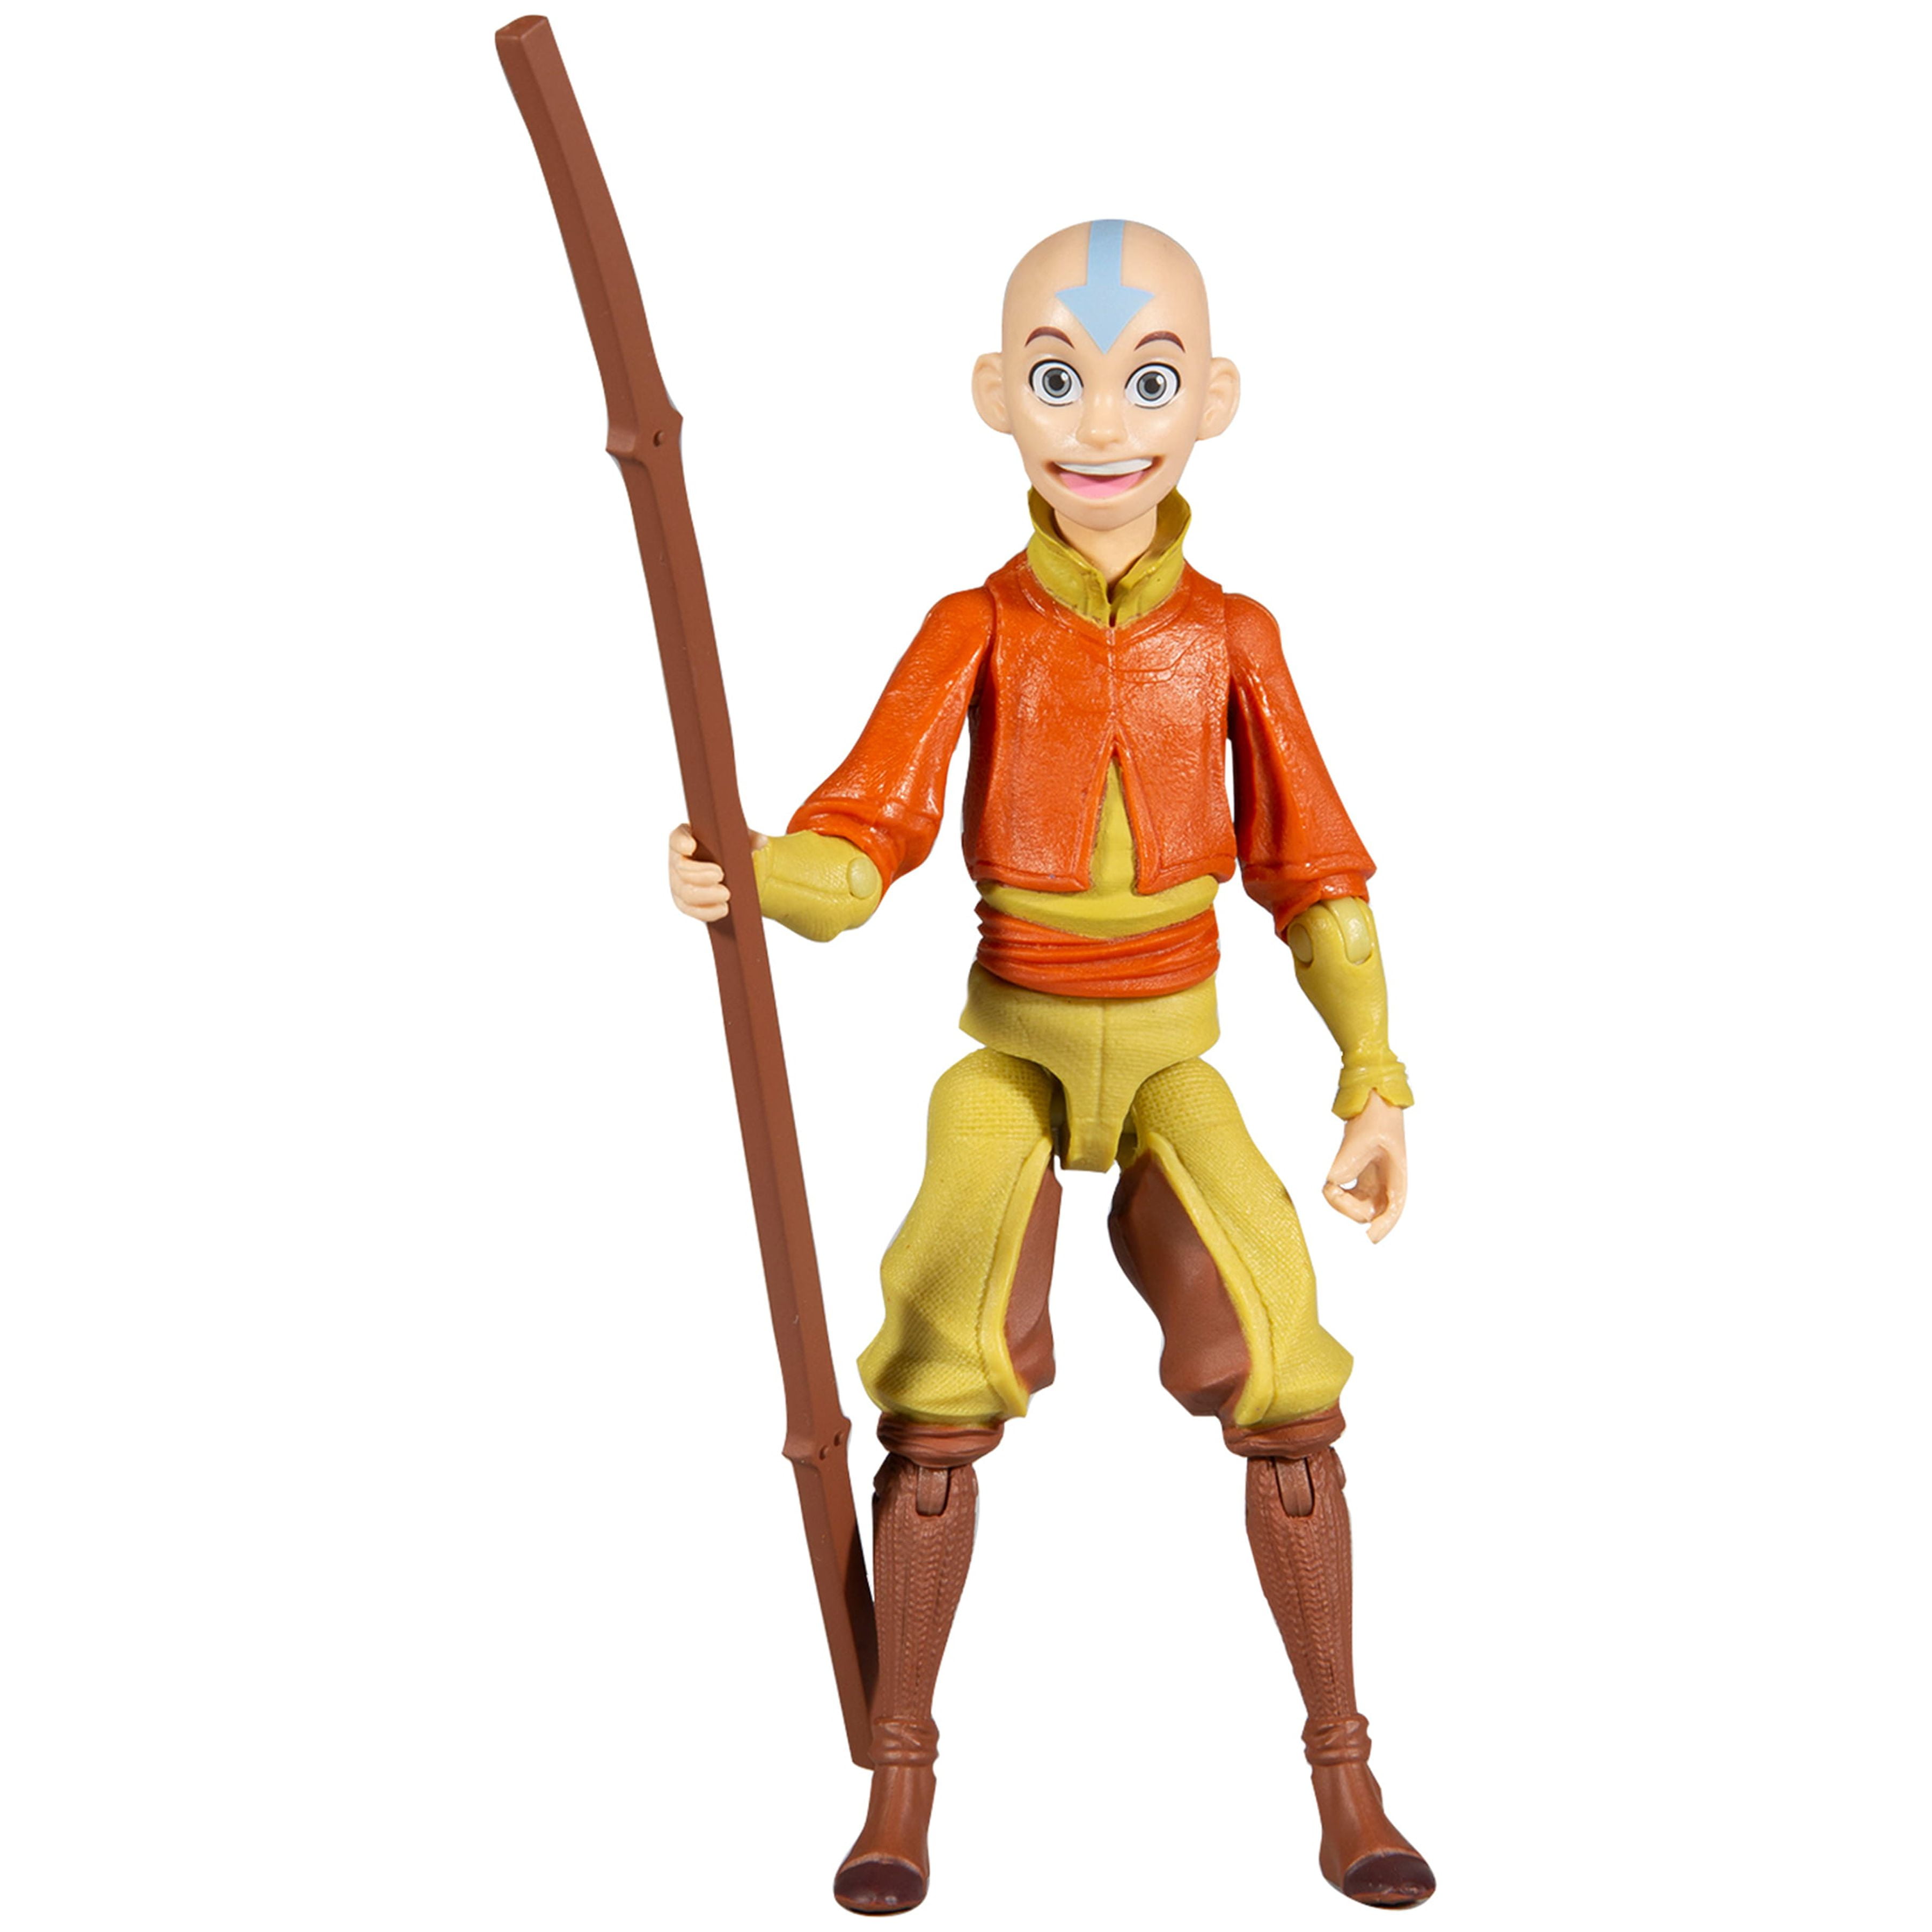 Aang Sees Past Avatars